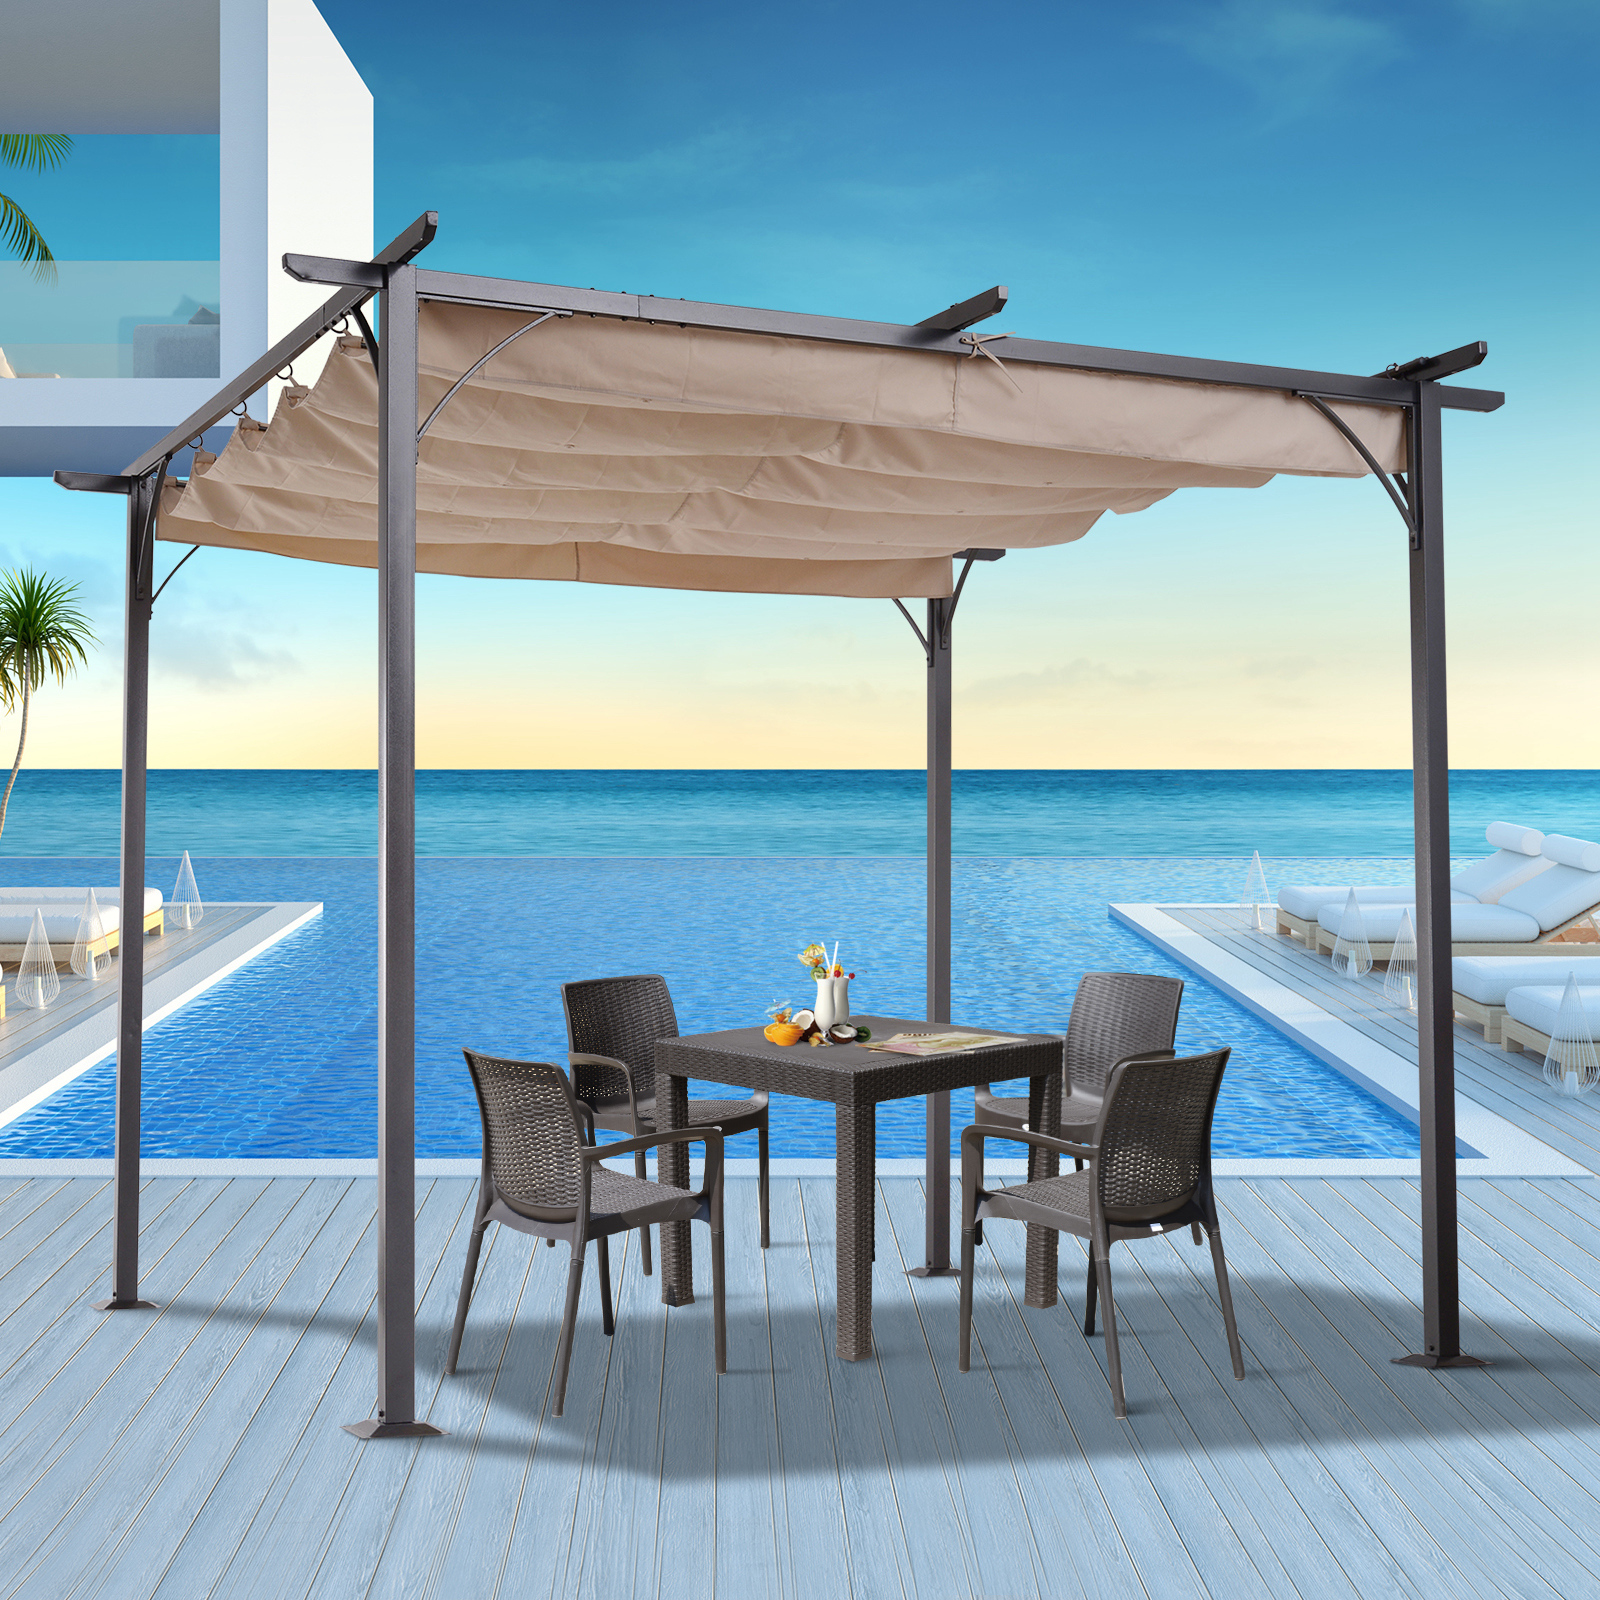 Outsunny 10' x 10' x 7.5' Beige and Black Polyester and Steel Pergola - image 1 of 10